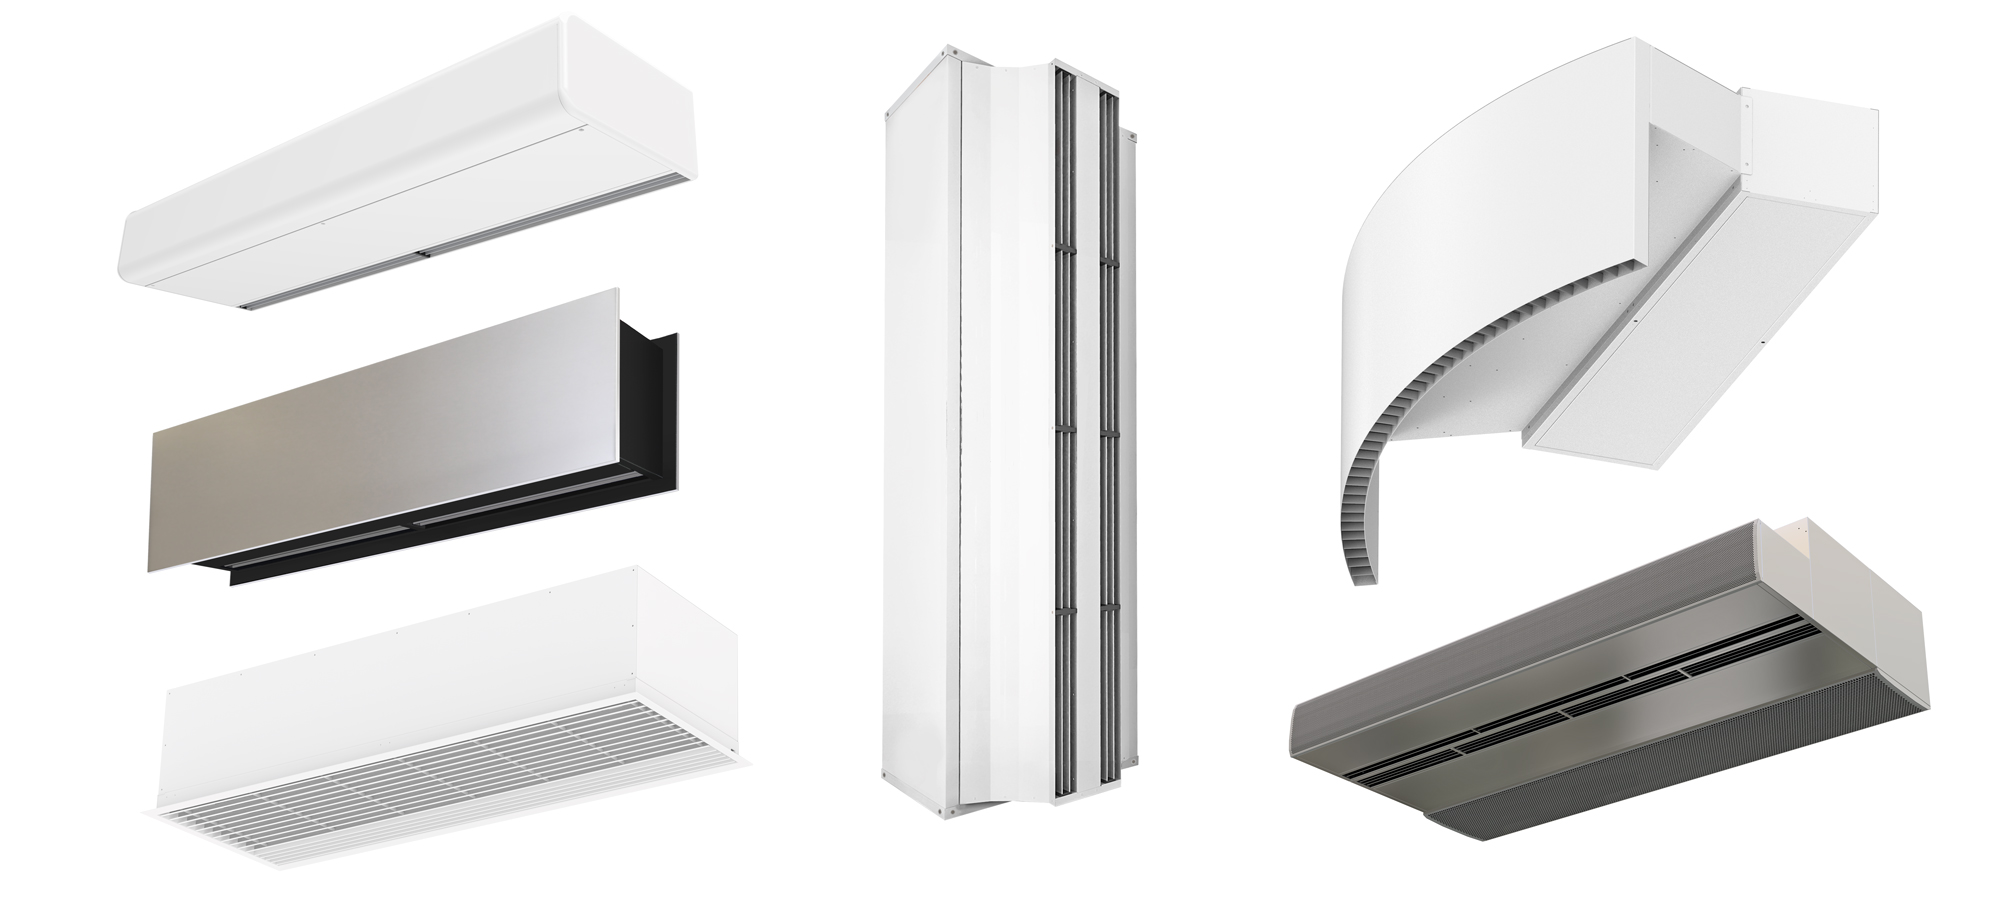 Selection of different air curtains models from Airtècncis